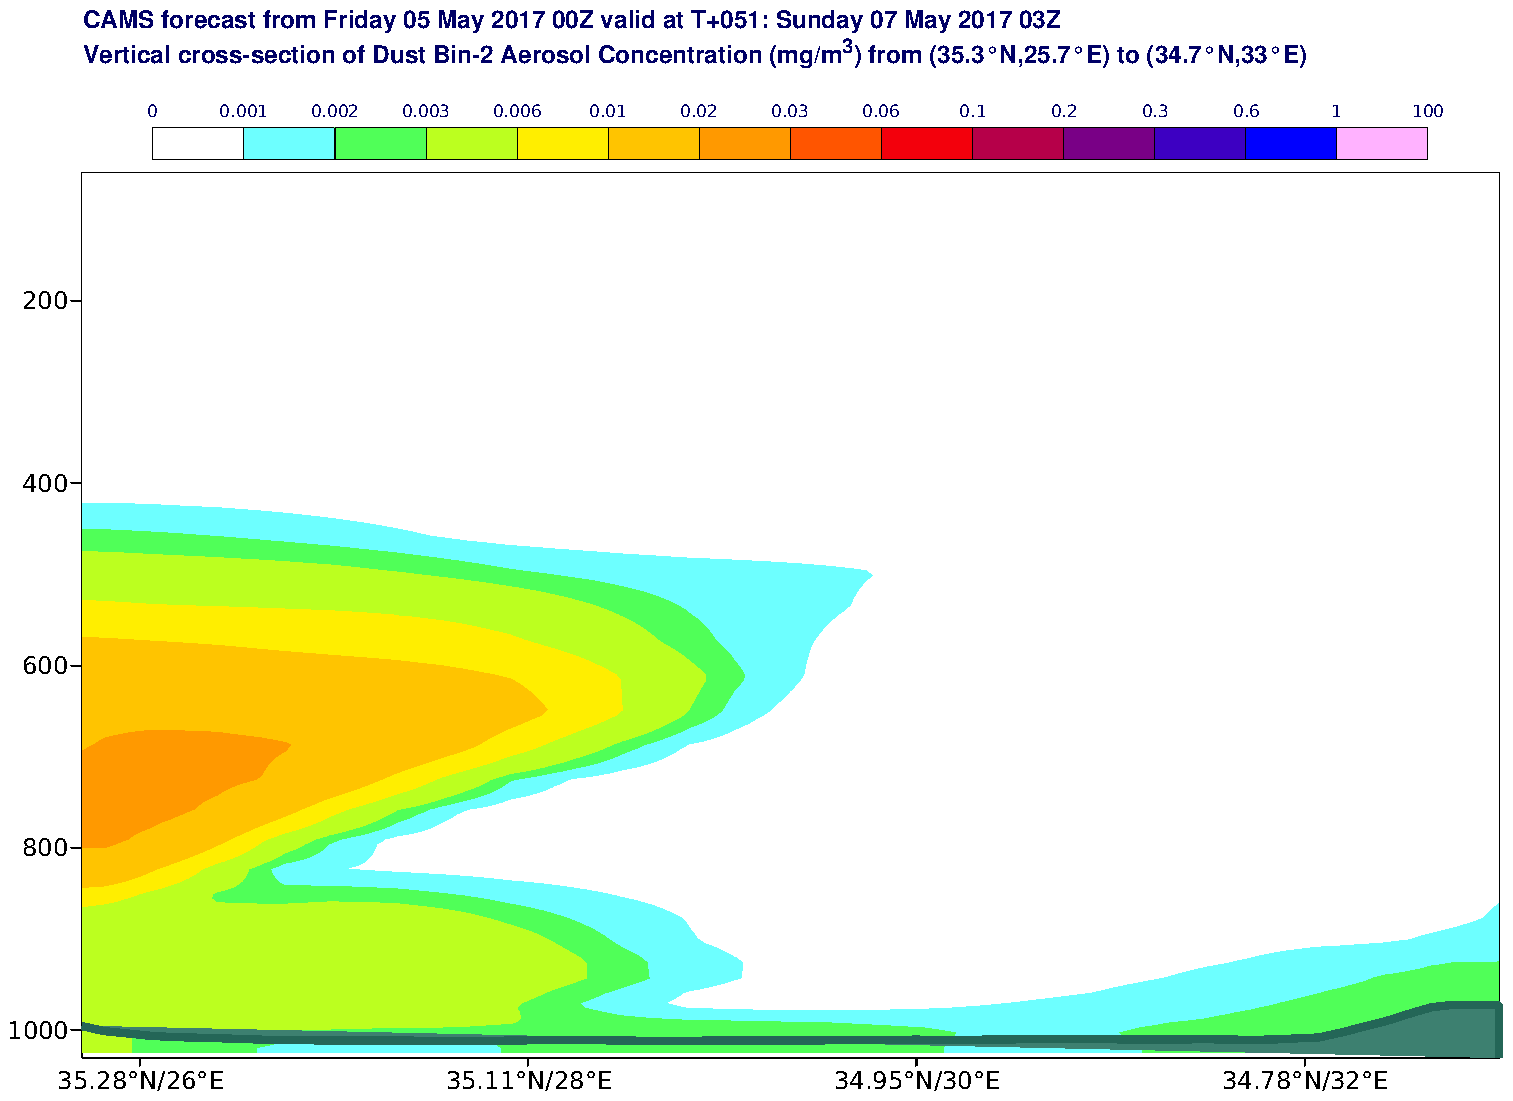 Vertical cross-section of Dust Bin-2 Aerosol Concentration (mg/m3) valid at T51 - 2017-05-07 03:00